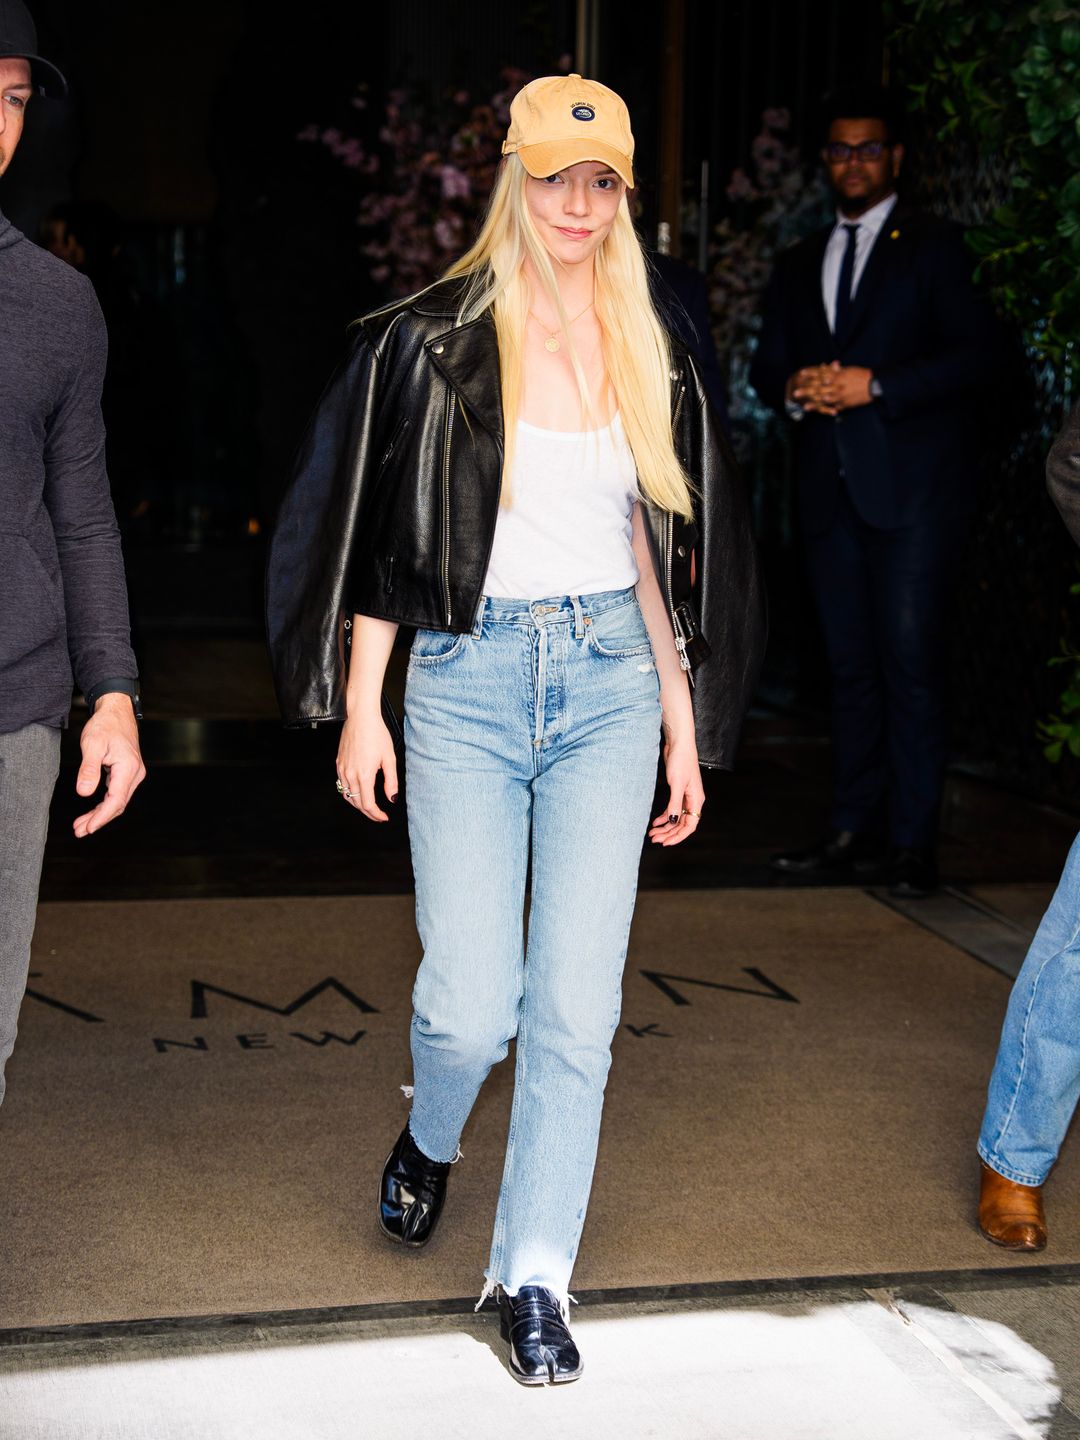  Anya Taylor-Joy is seen in Midtown on April 16, 2024 in New York City wearing blue jeans, a white tank top and a leather jacket